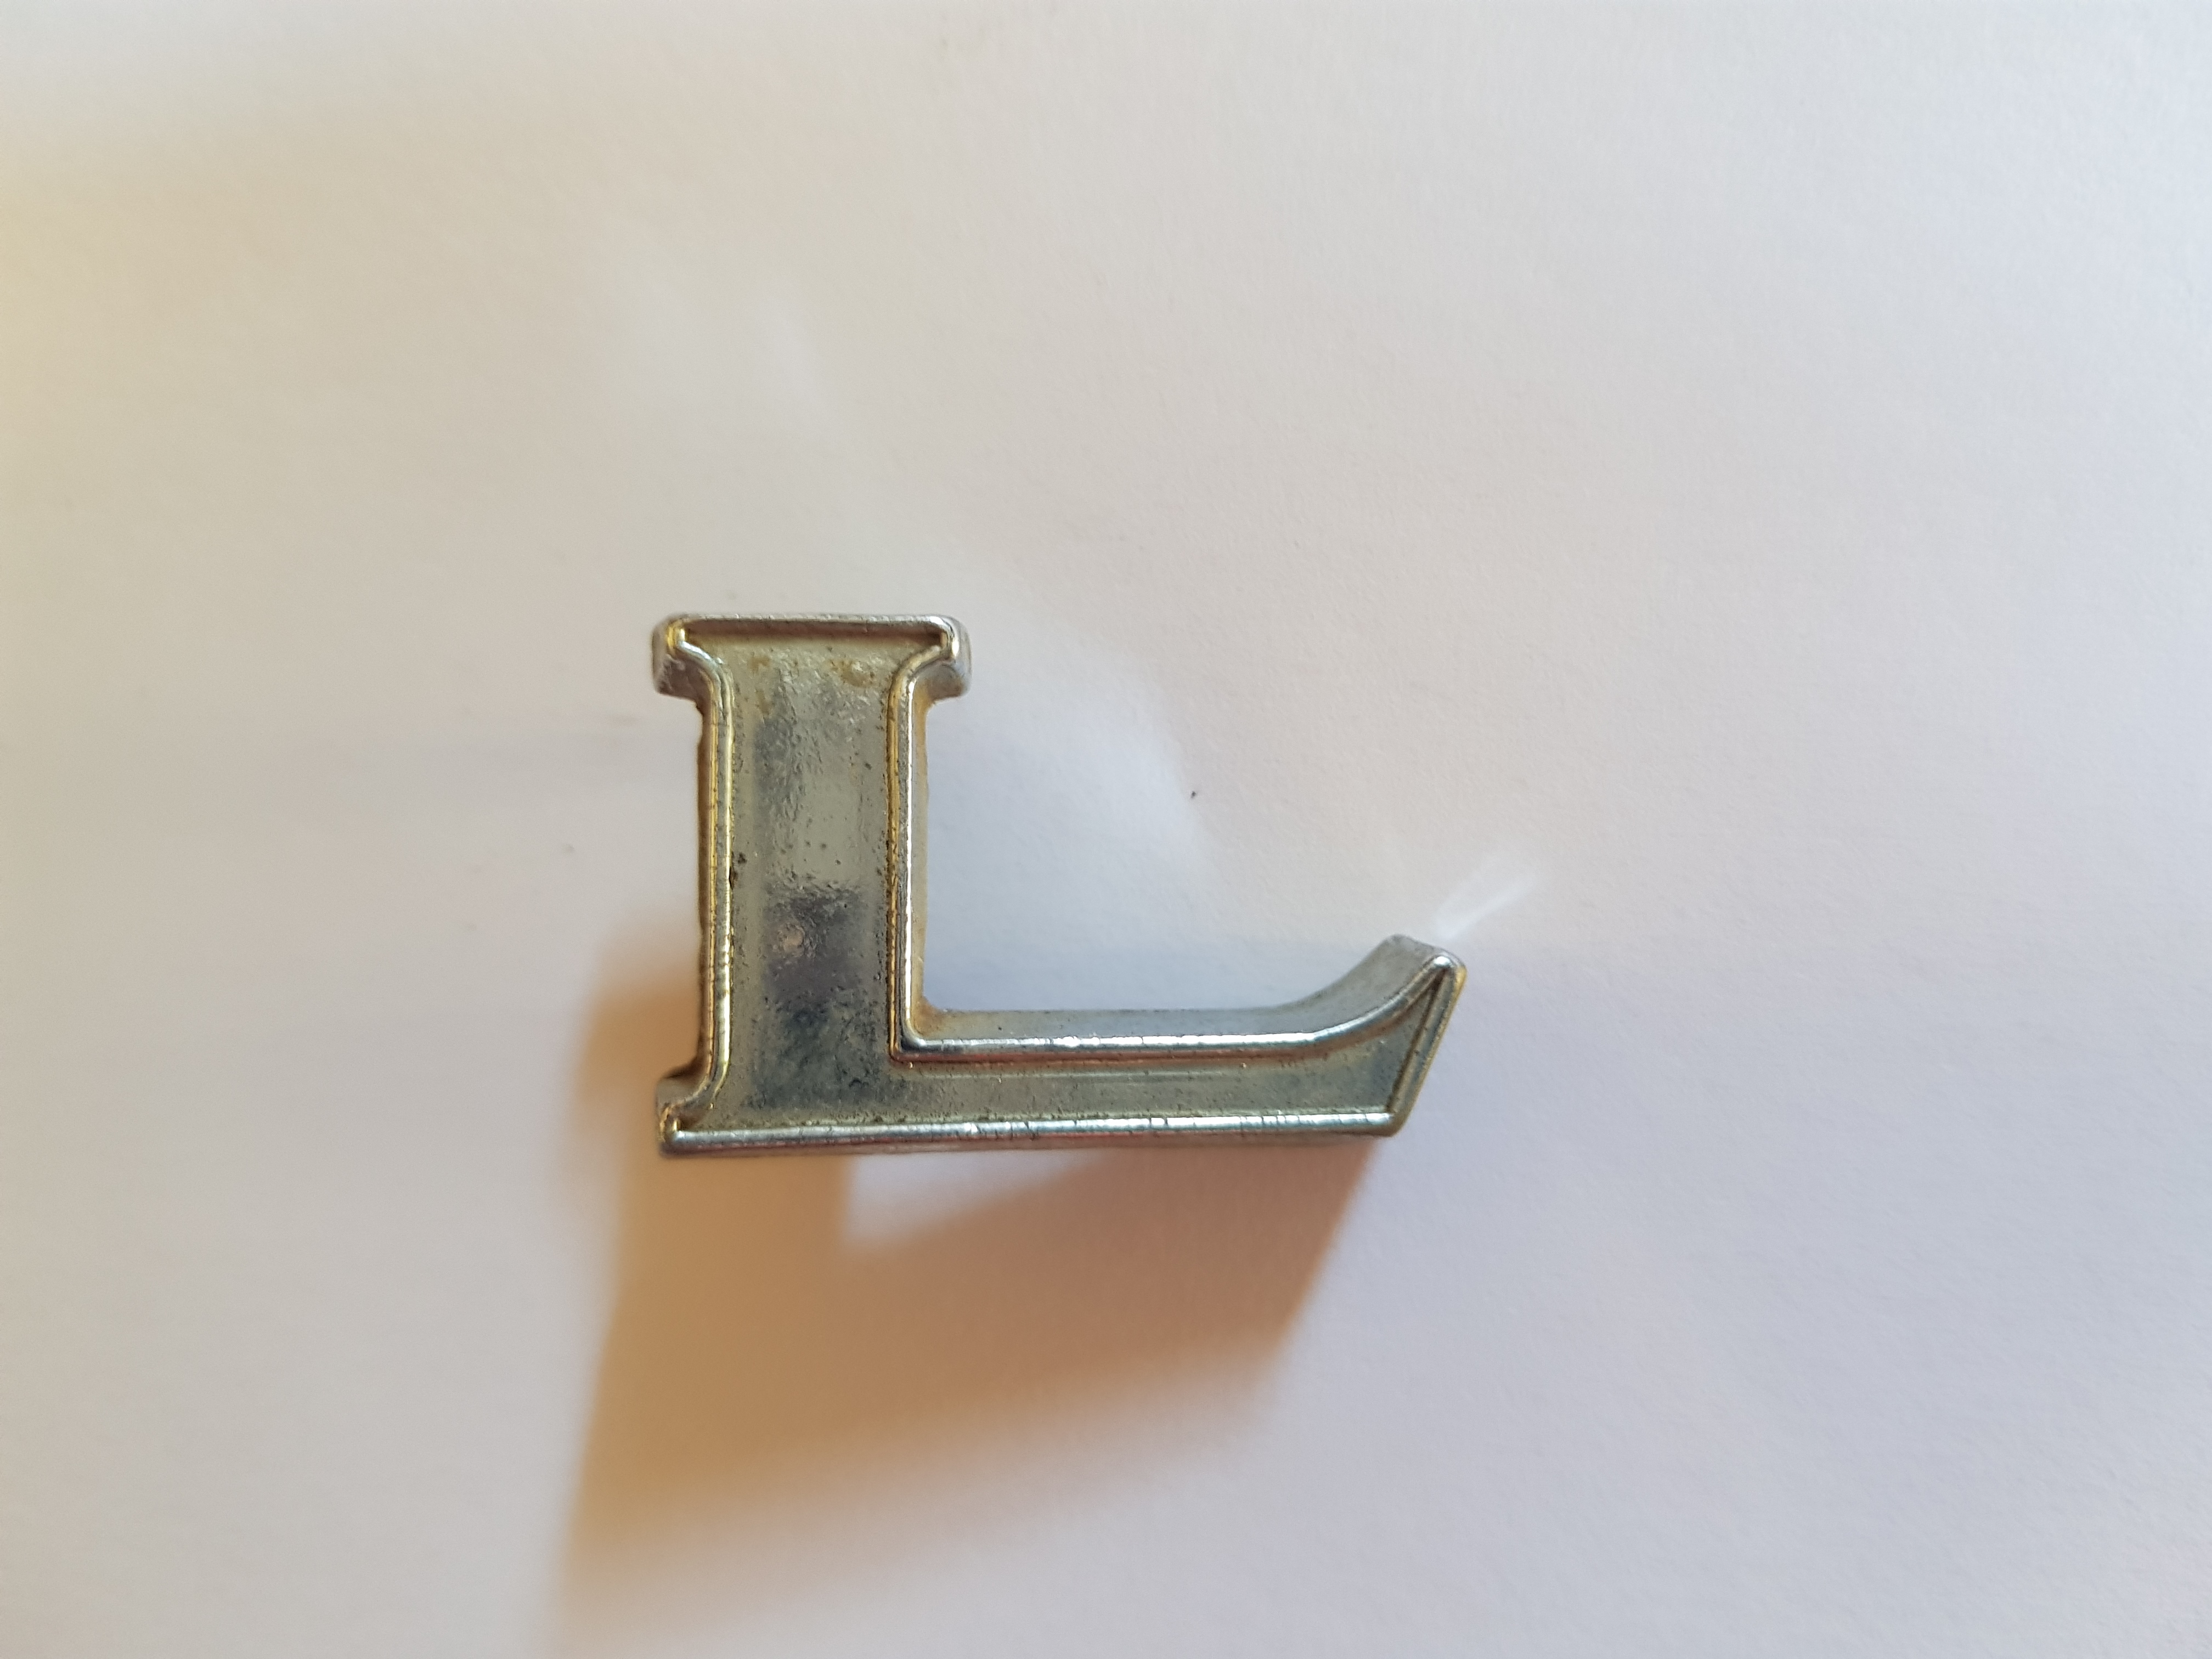 'L' Boot Letter Badge, Salvaged